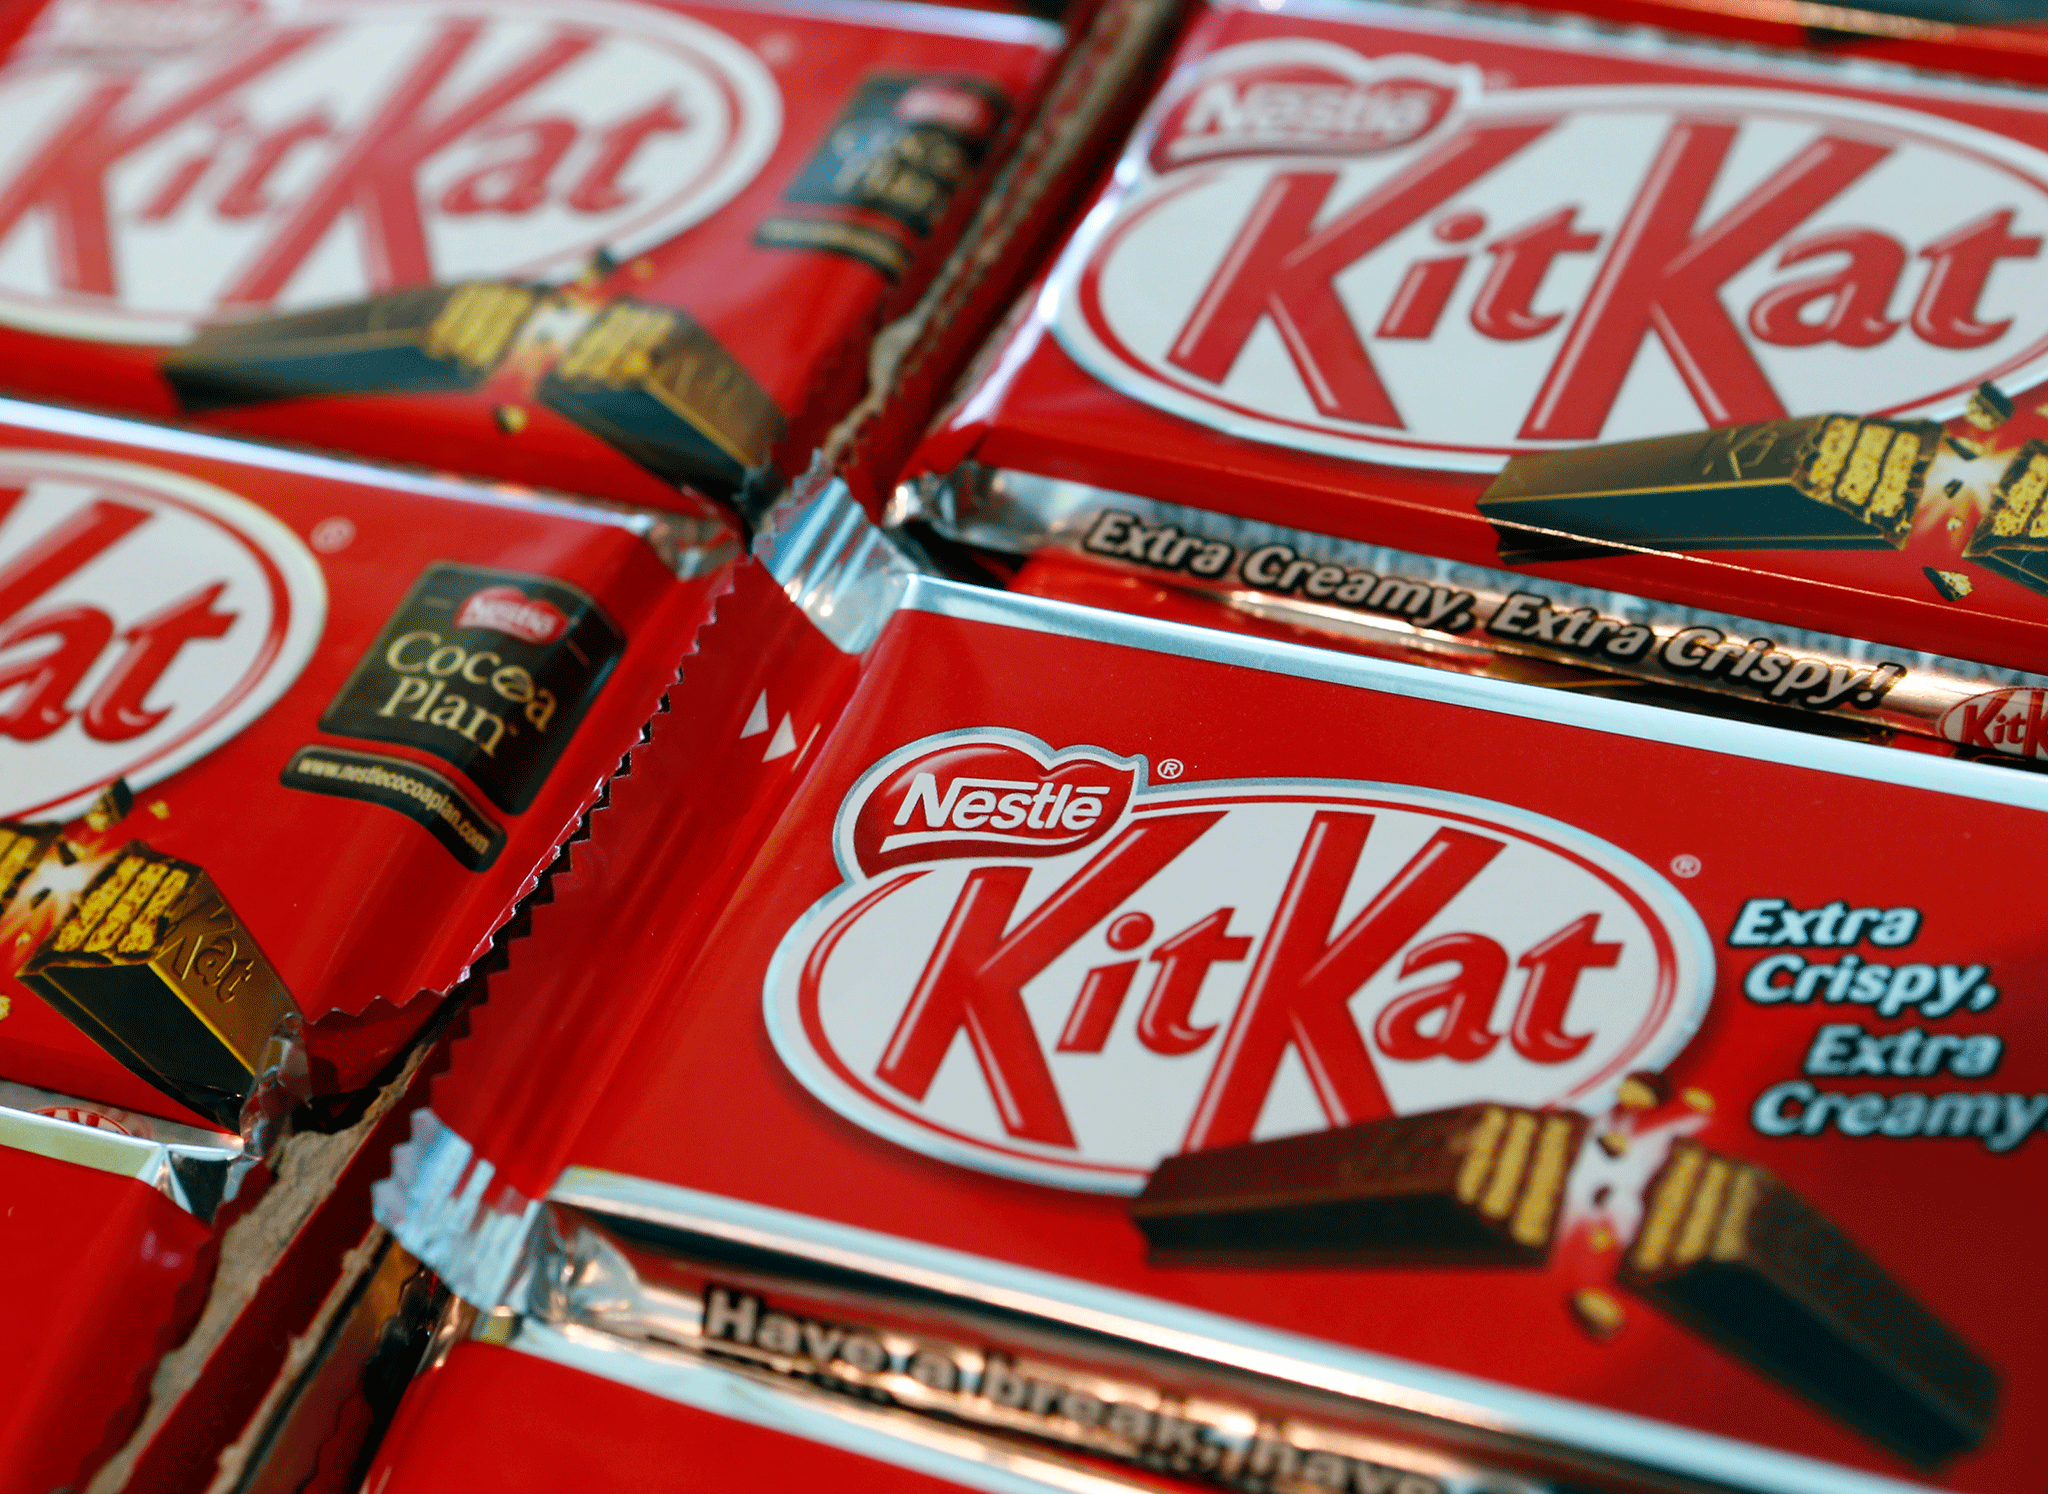 Kit Kats have been at the centre of an acrimonious battle of wills between Nestle and Mondelez International